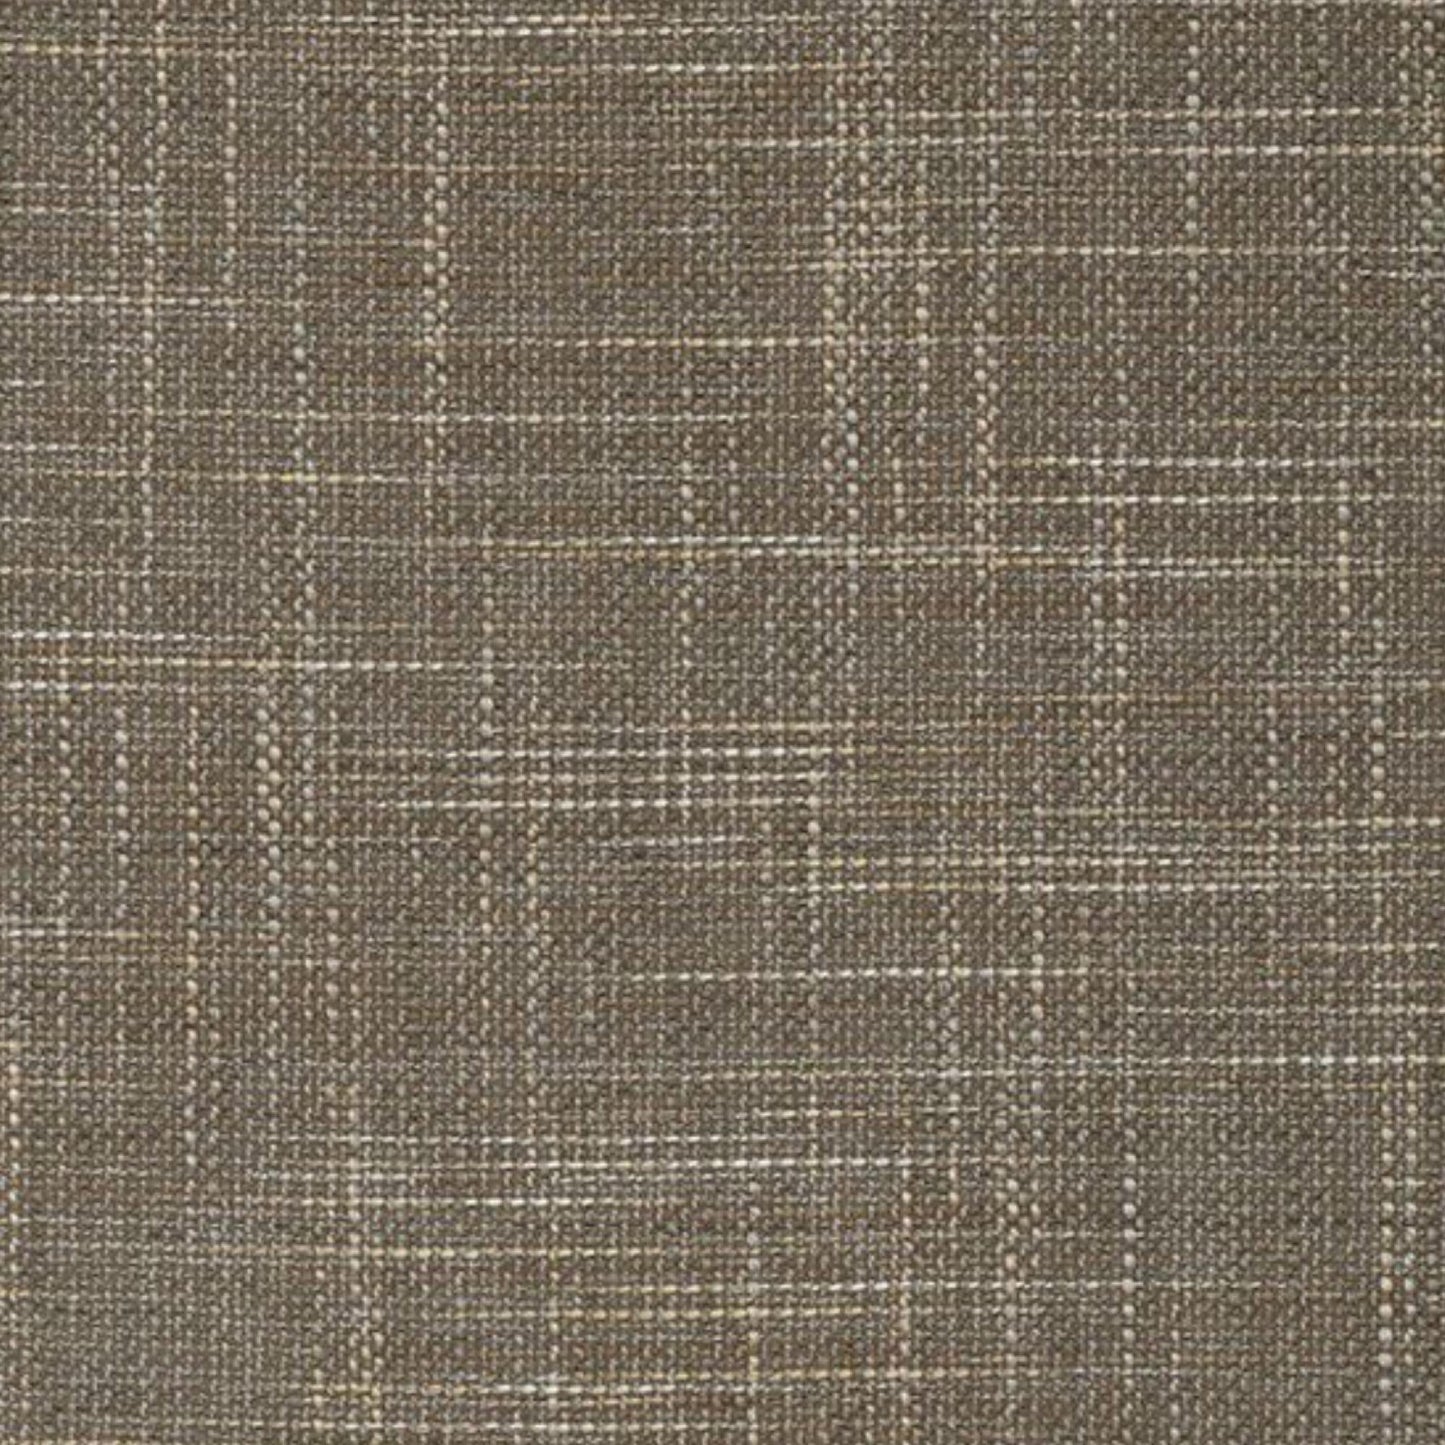 RHODES DRIFTWOOD FABRIC SAMPLE | PREMIUM COLLECTION